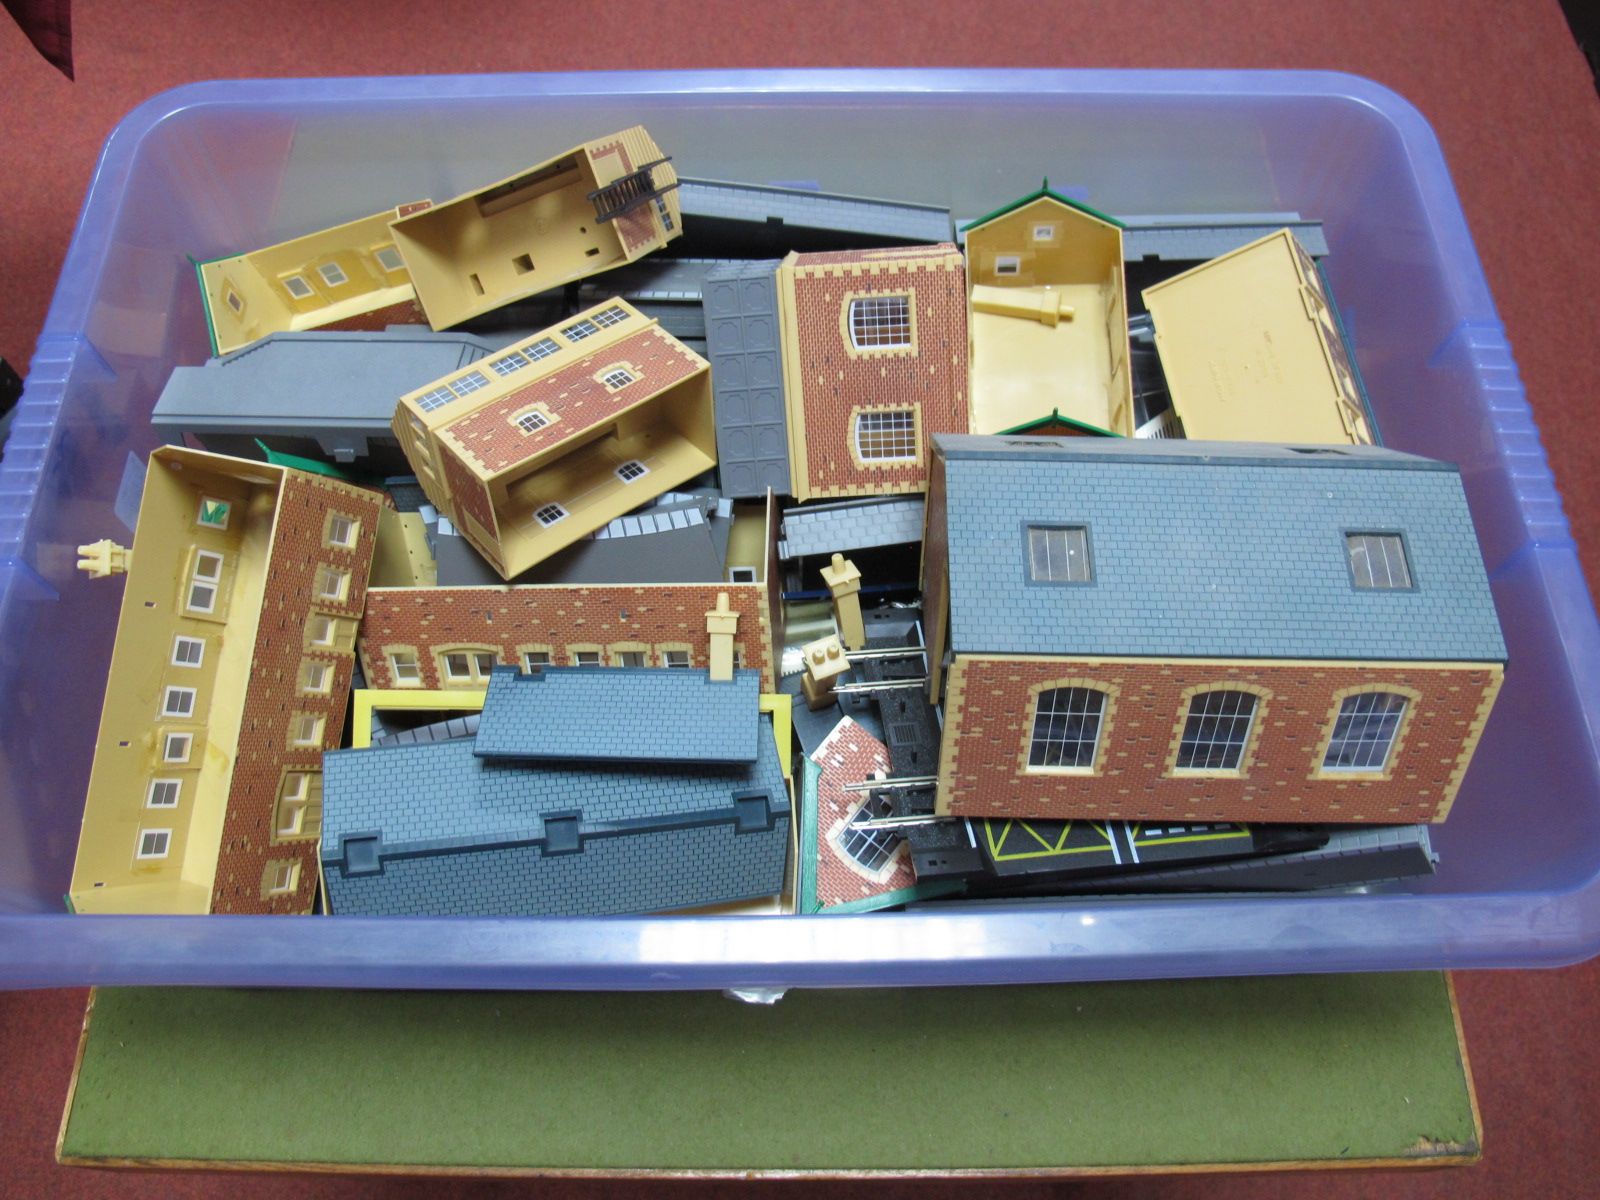 A Quantity of Hornby "00" Gauge Plastic Line side Buildings and Platforms.(Playworn)